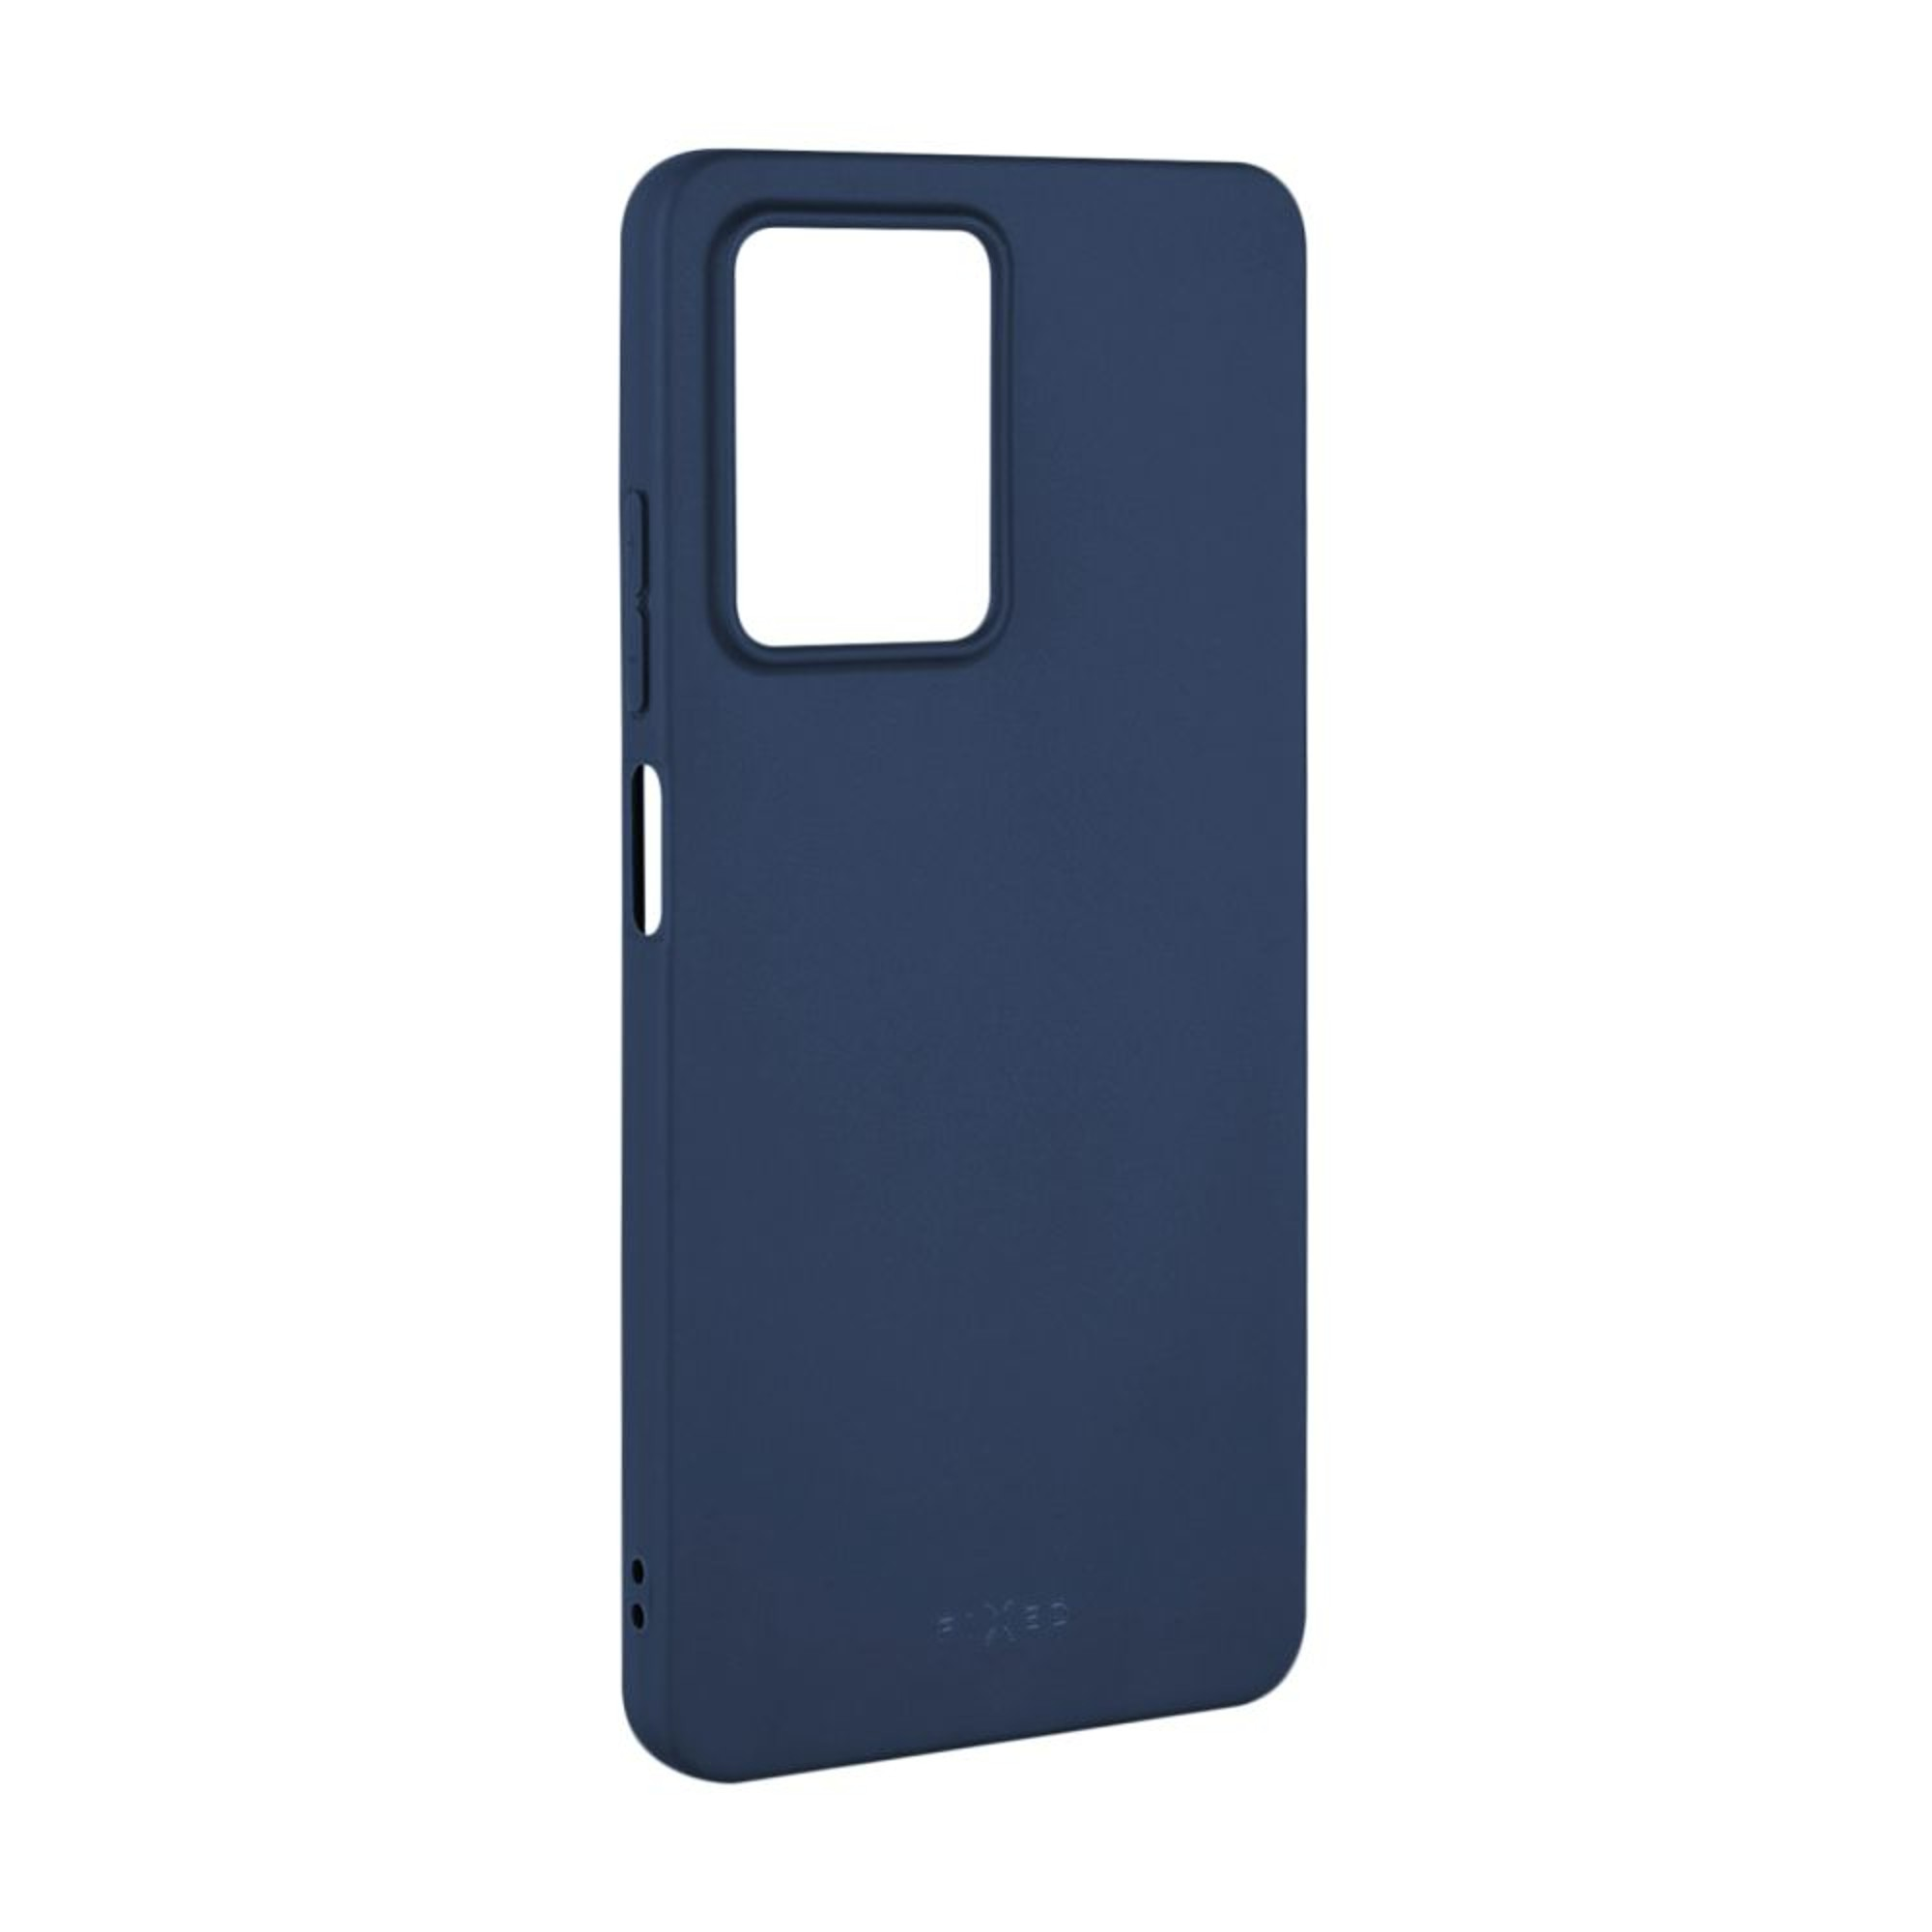 Blau POCO Soft-Touch Backcover, FIXST-1101-BL, Pro FIXED Story 5G, X5 Xiaomi,